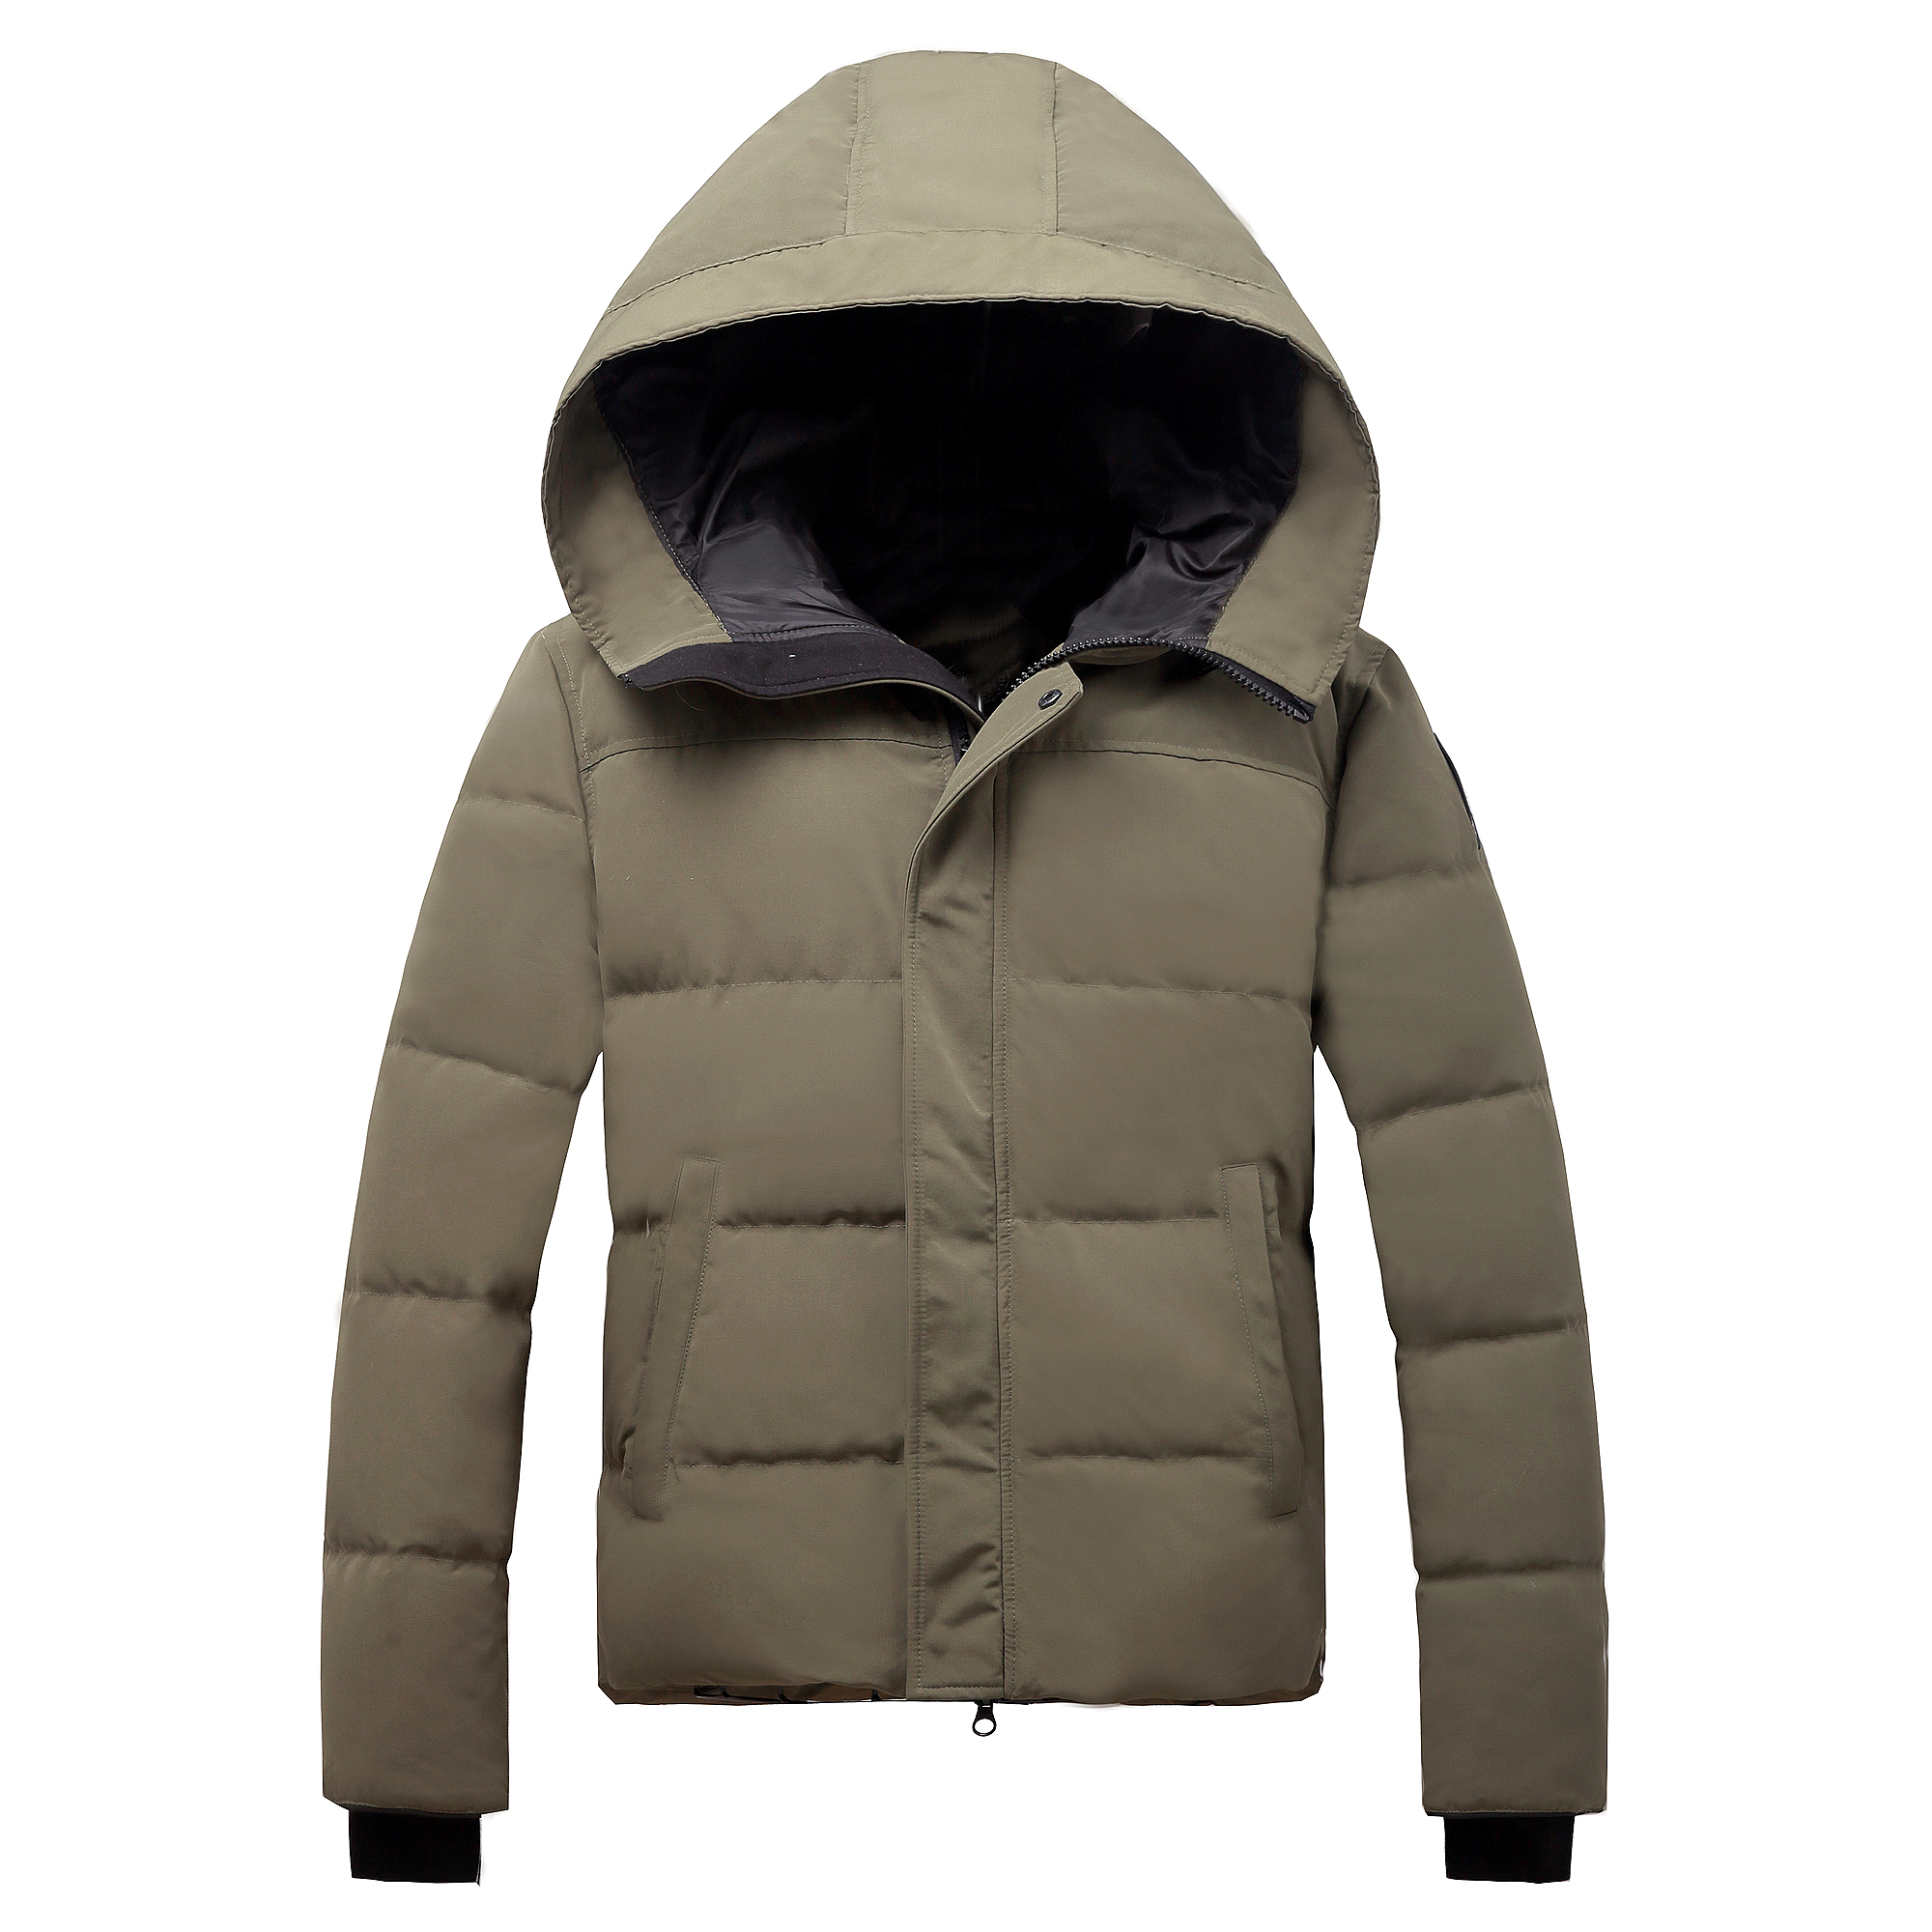 Cheap 2017 New Canada Goose Jackets For Men # 171784,$110 [FB171784 ...